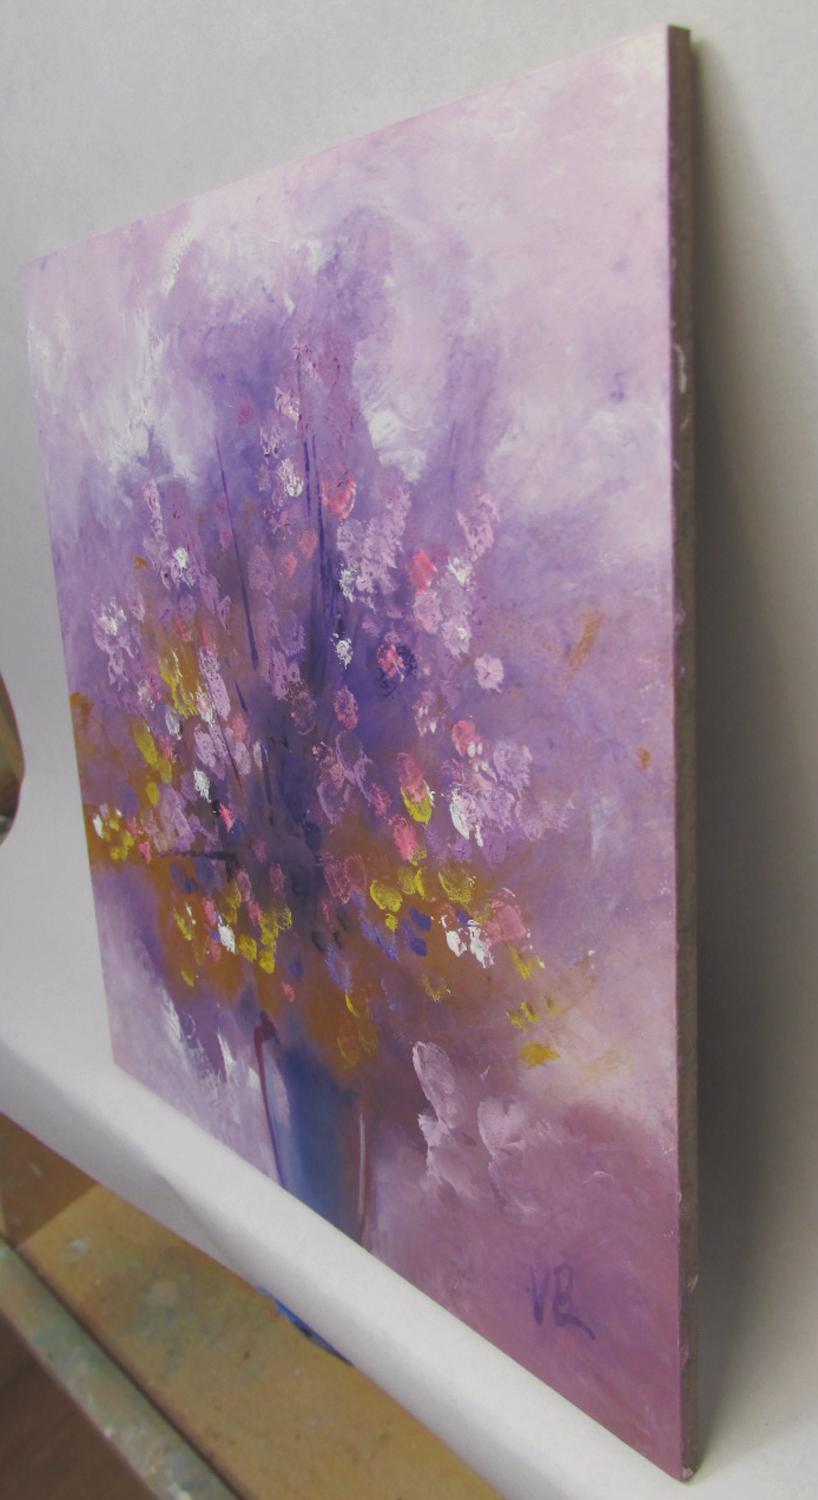 <p>Artist Comments<br>Artist Valerie Berkely displays and abstract floral filled with small peppy blossoms. She creates a glowing background using a limited palette of transparent purples and yellows. Valerie demonstrates expressive finger painting